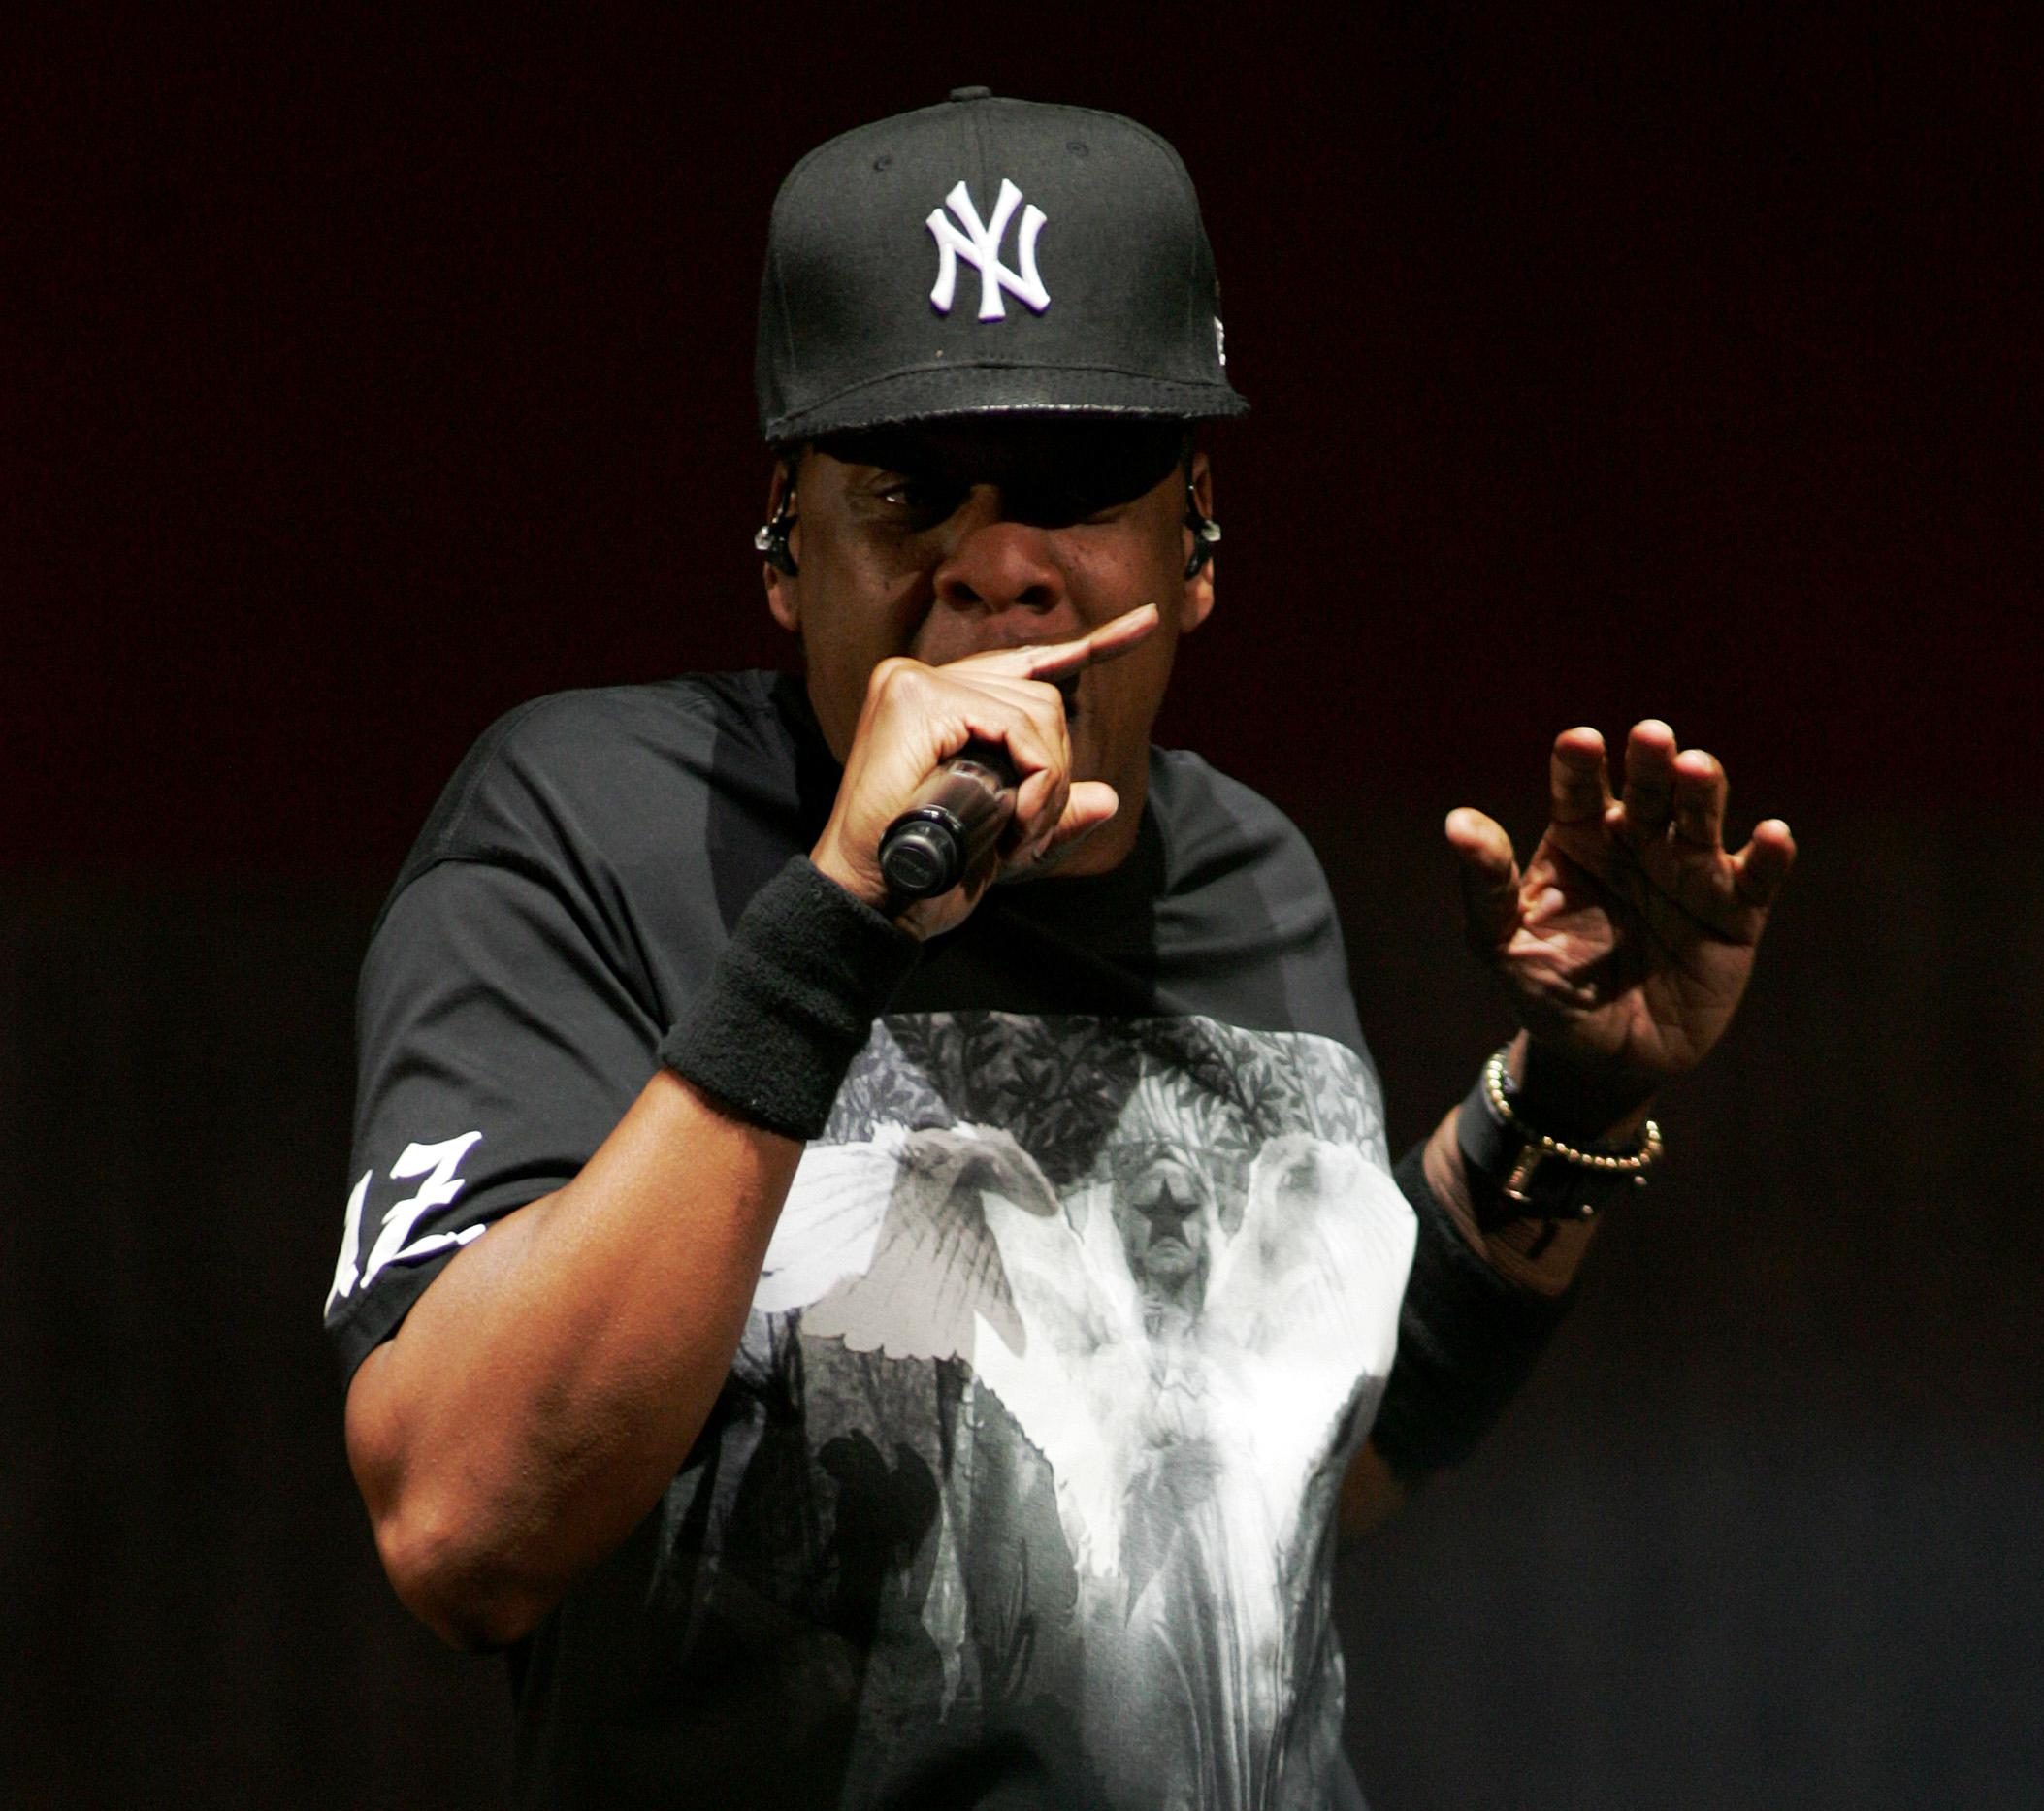 Jay-Z And Kanye West 'Watch The Throne' Tour In Kansas City